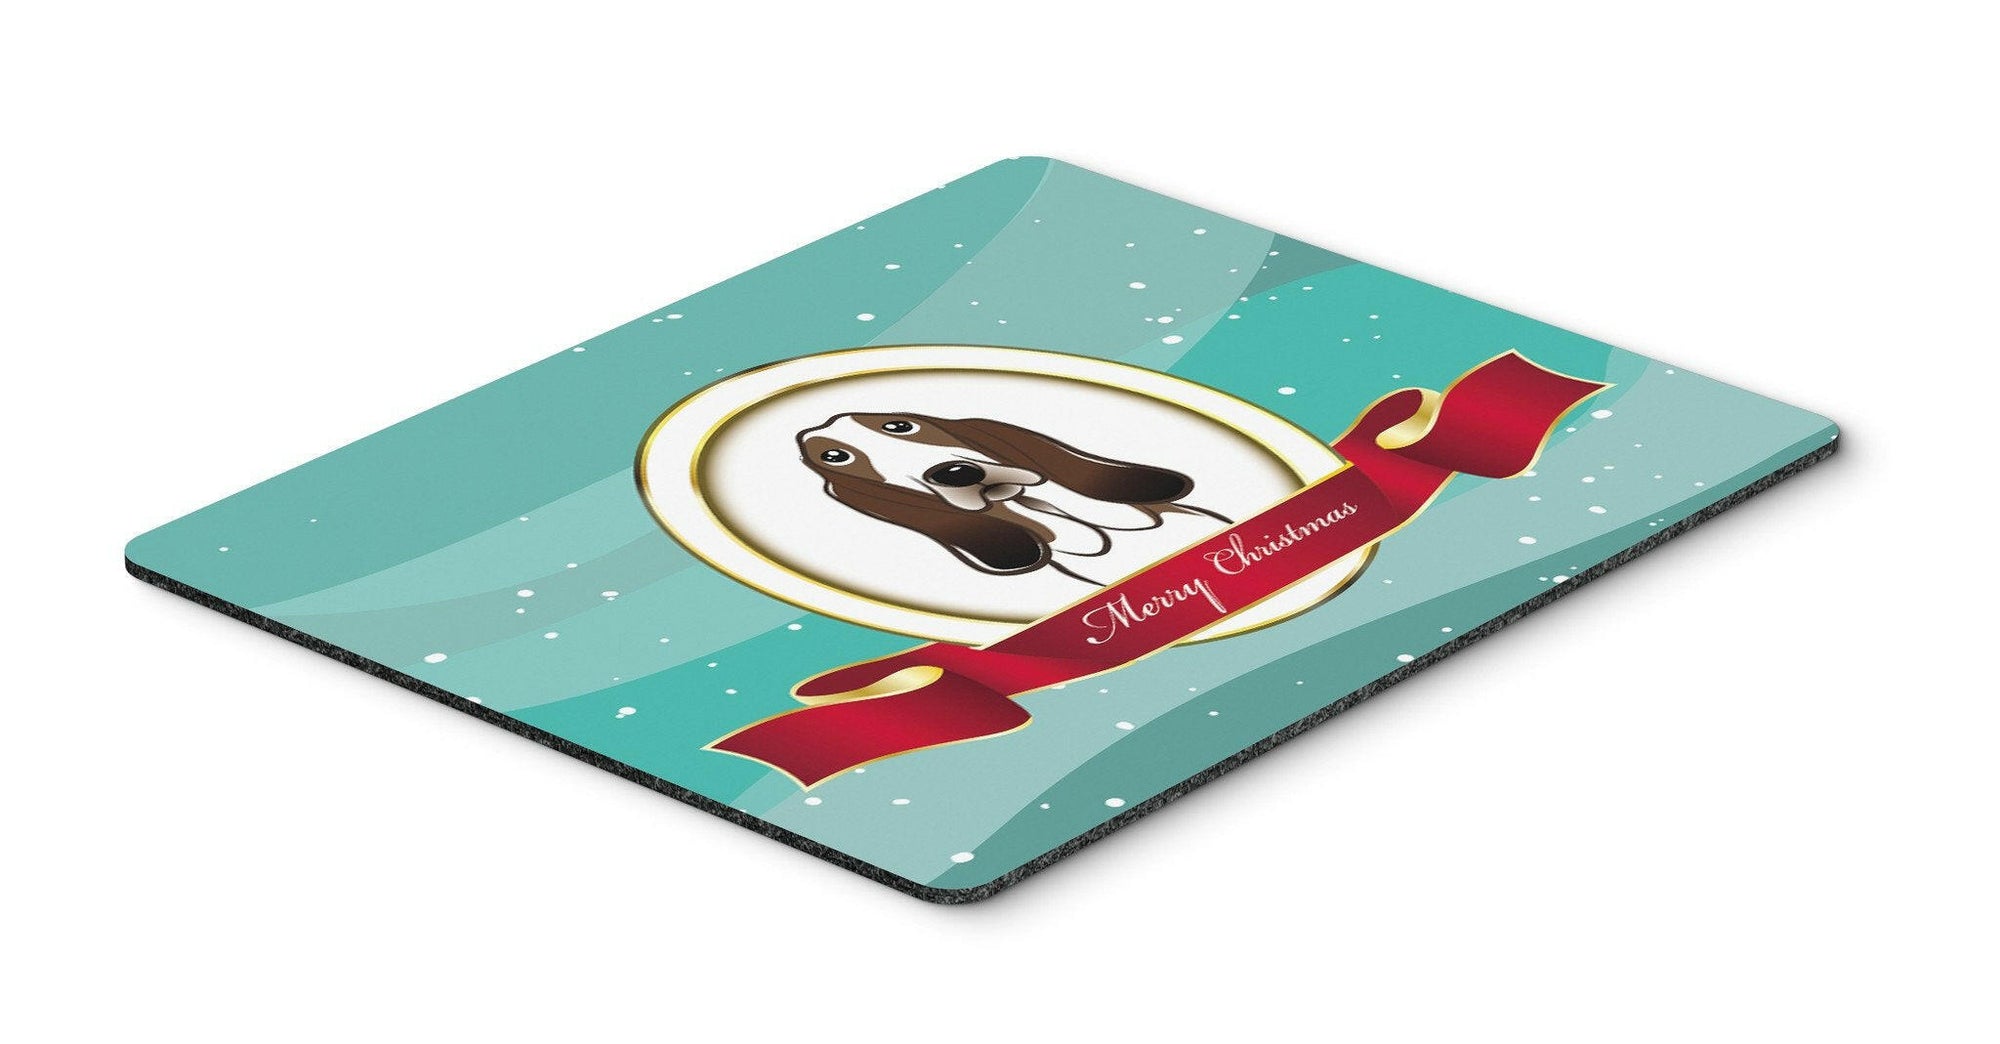 Basset Hound Merry Christmas Mouse Pad, Hot Pad or Trivet BB1553MP by Caroline's Treasures